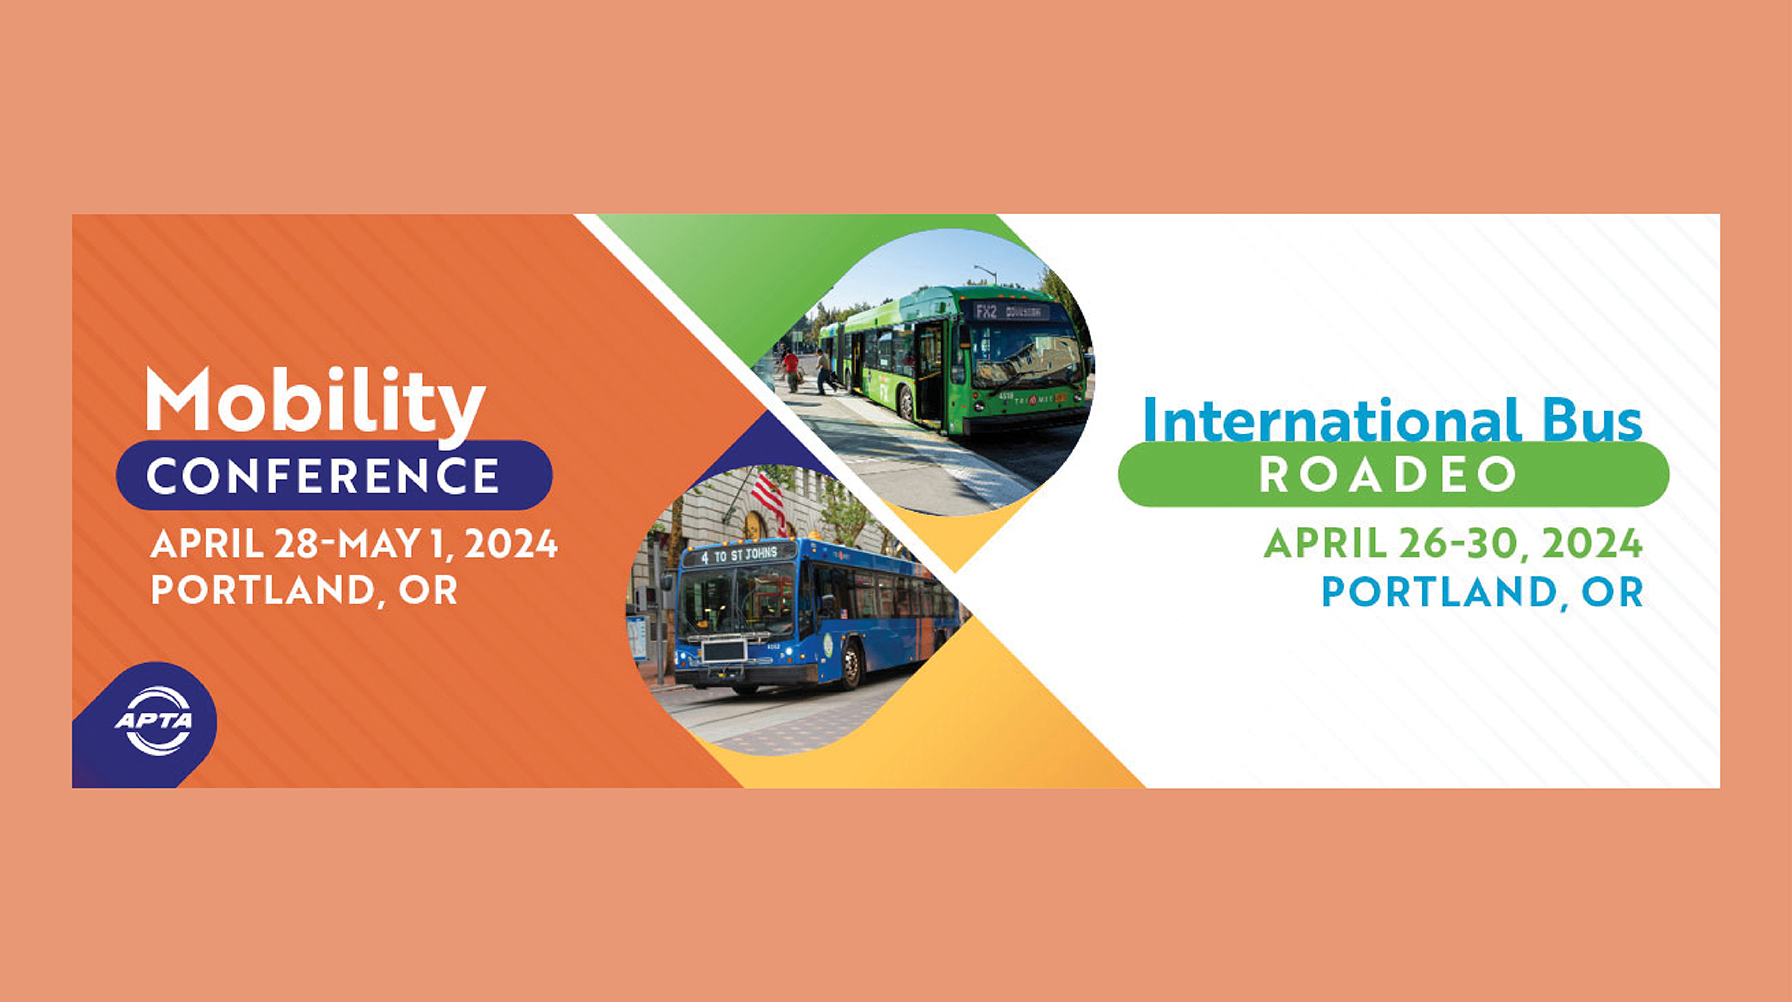 APTA Mobility Conference, International Bus Roadeo Open for